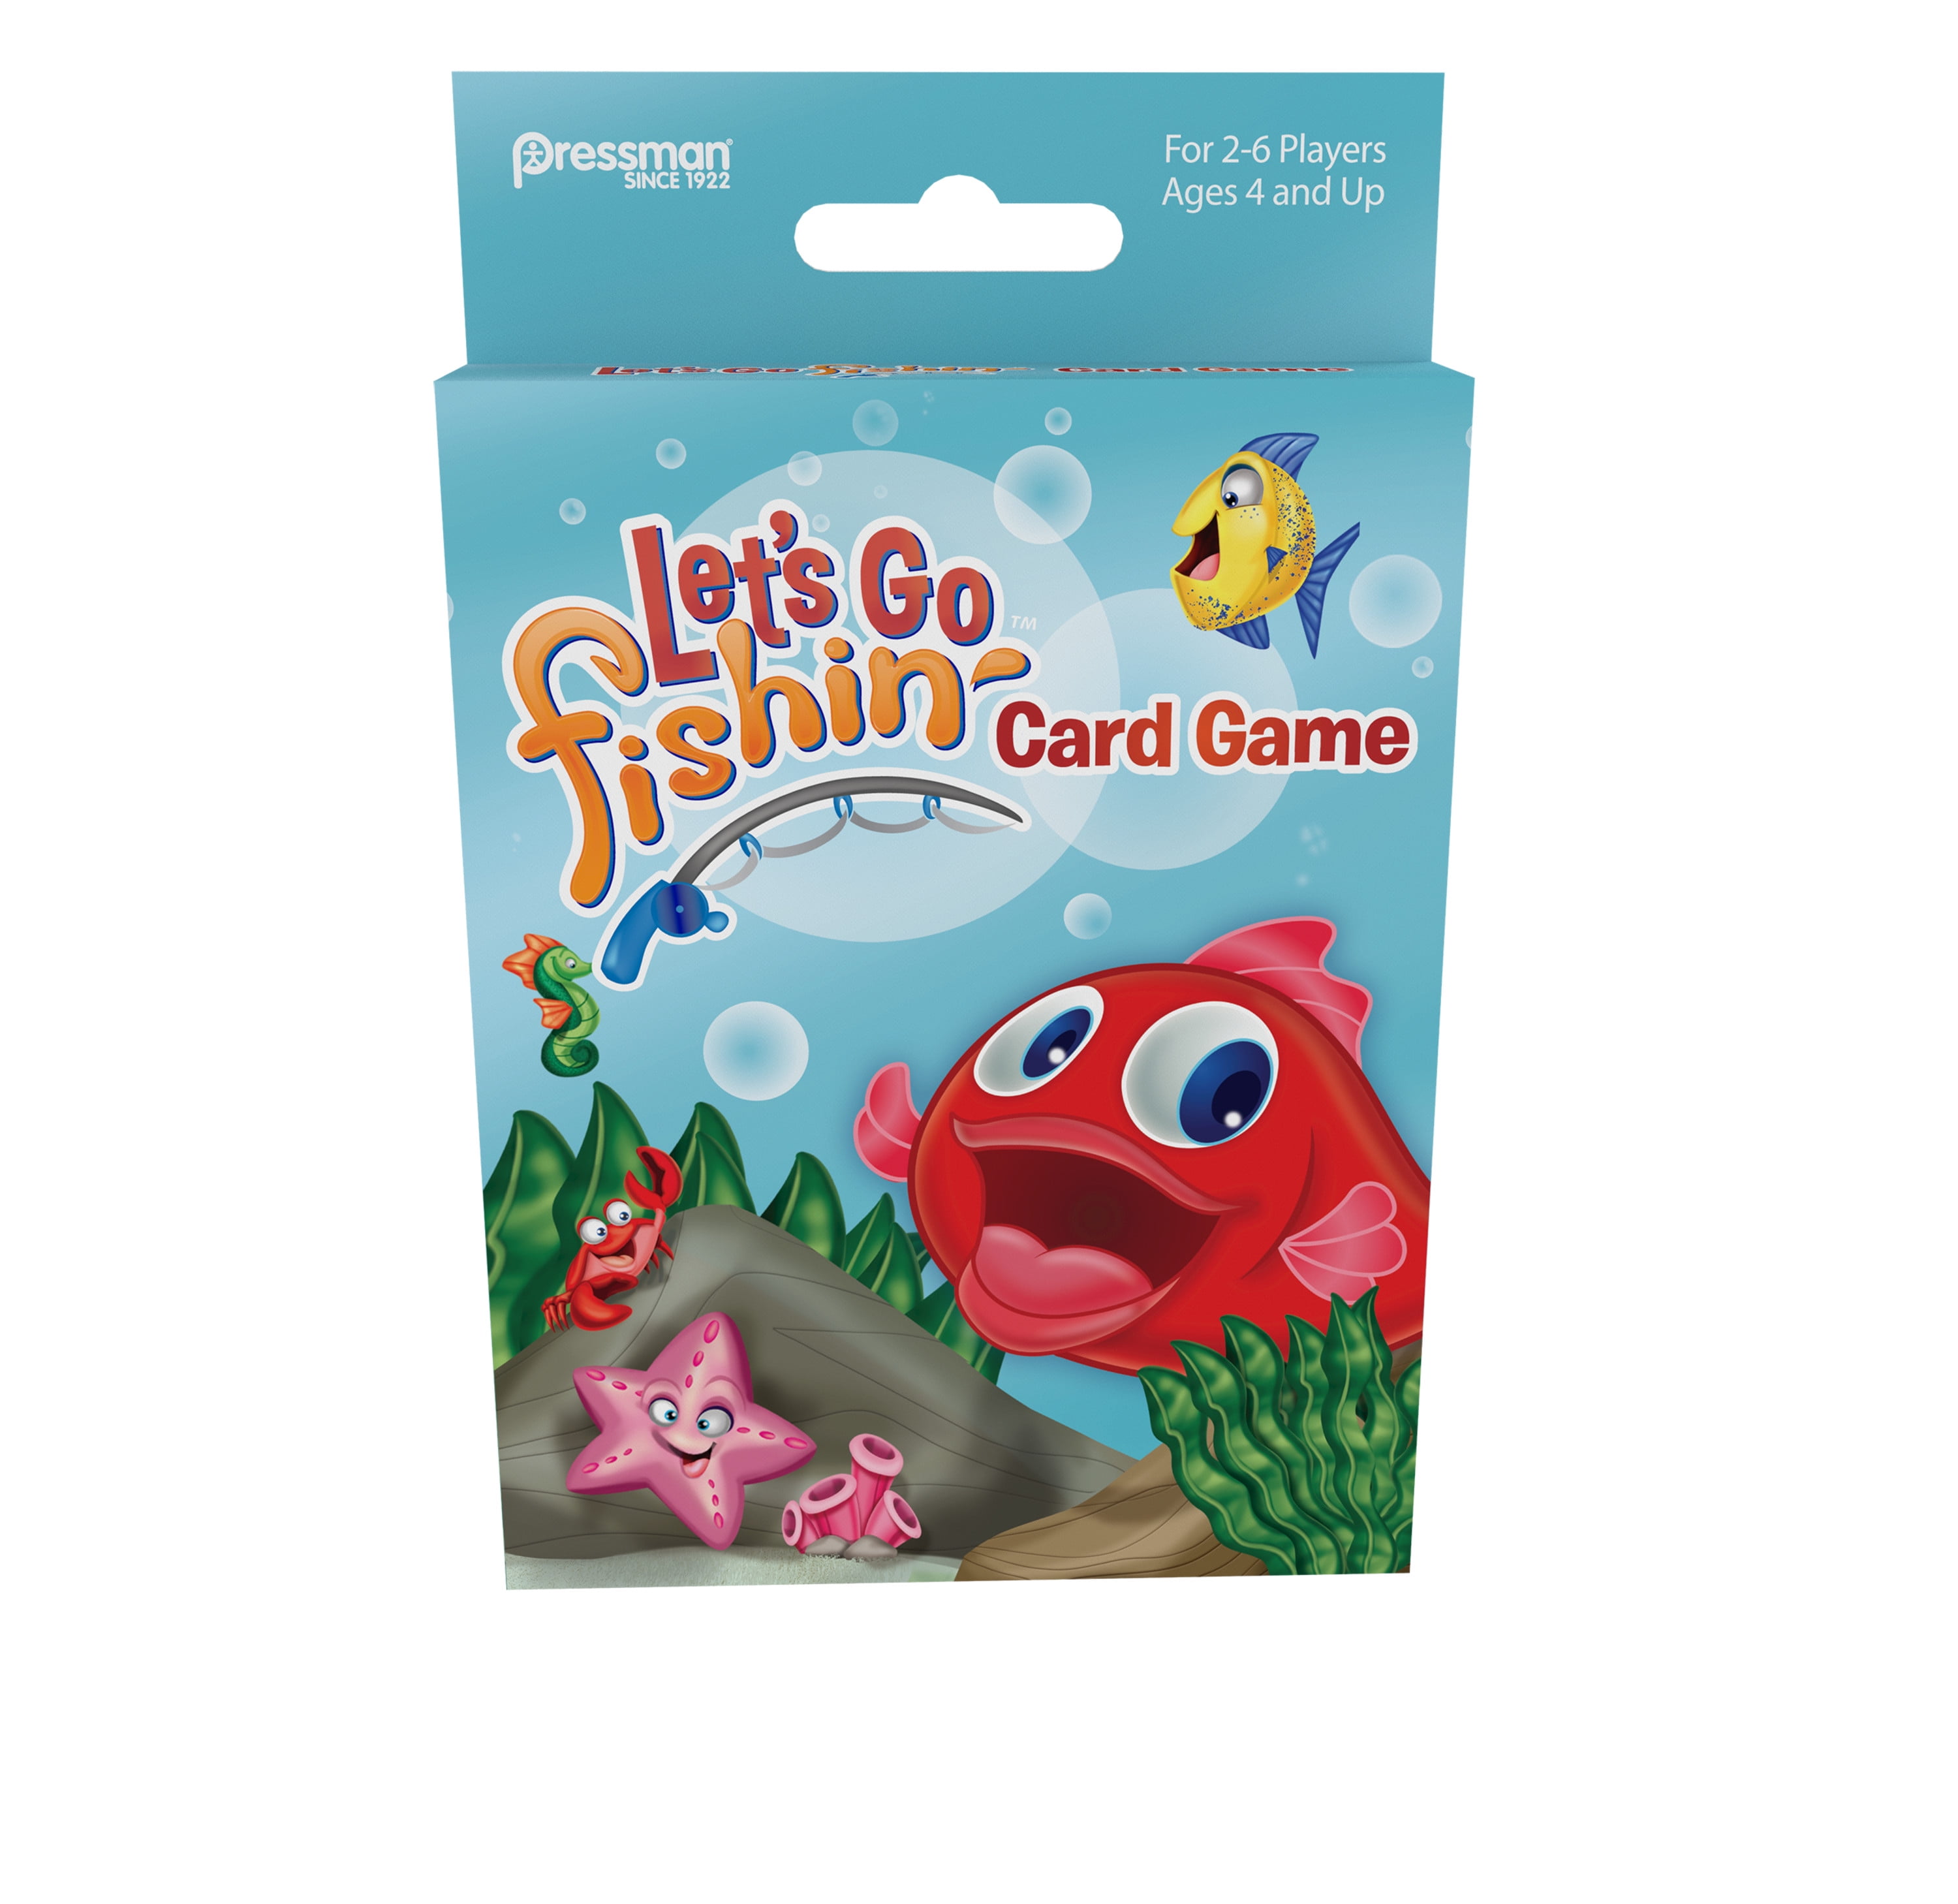 Lets Go Fishing Game